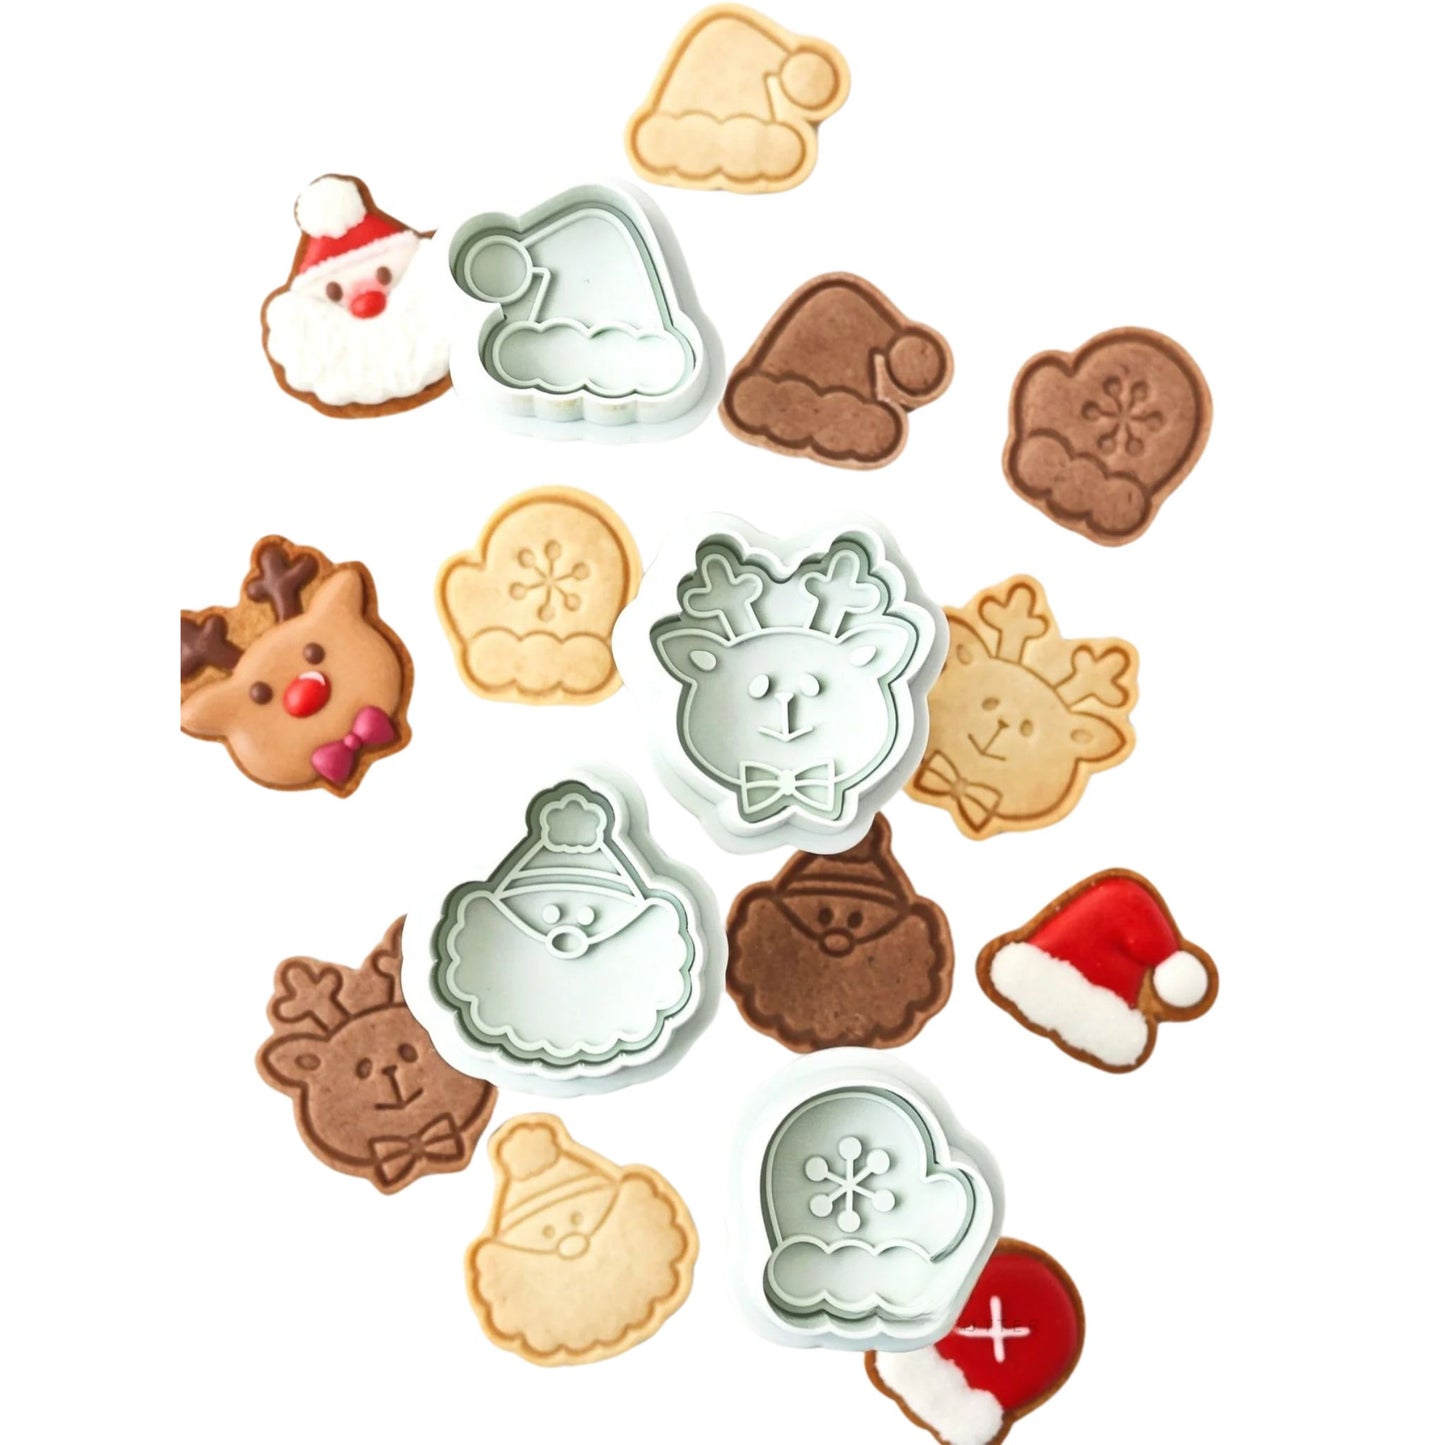 Create Christmas Cookies with Santa, Reindeer & Christmas Hat Cookie Molds for Party